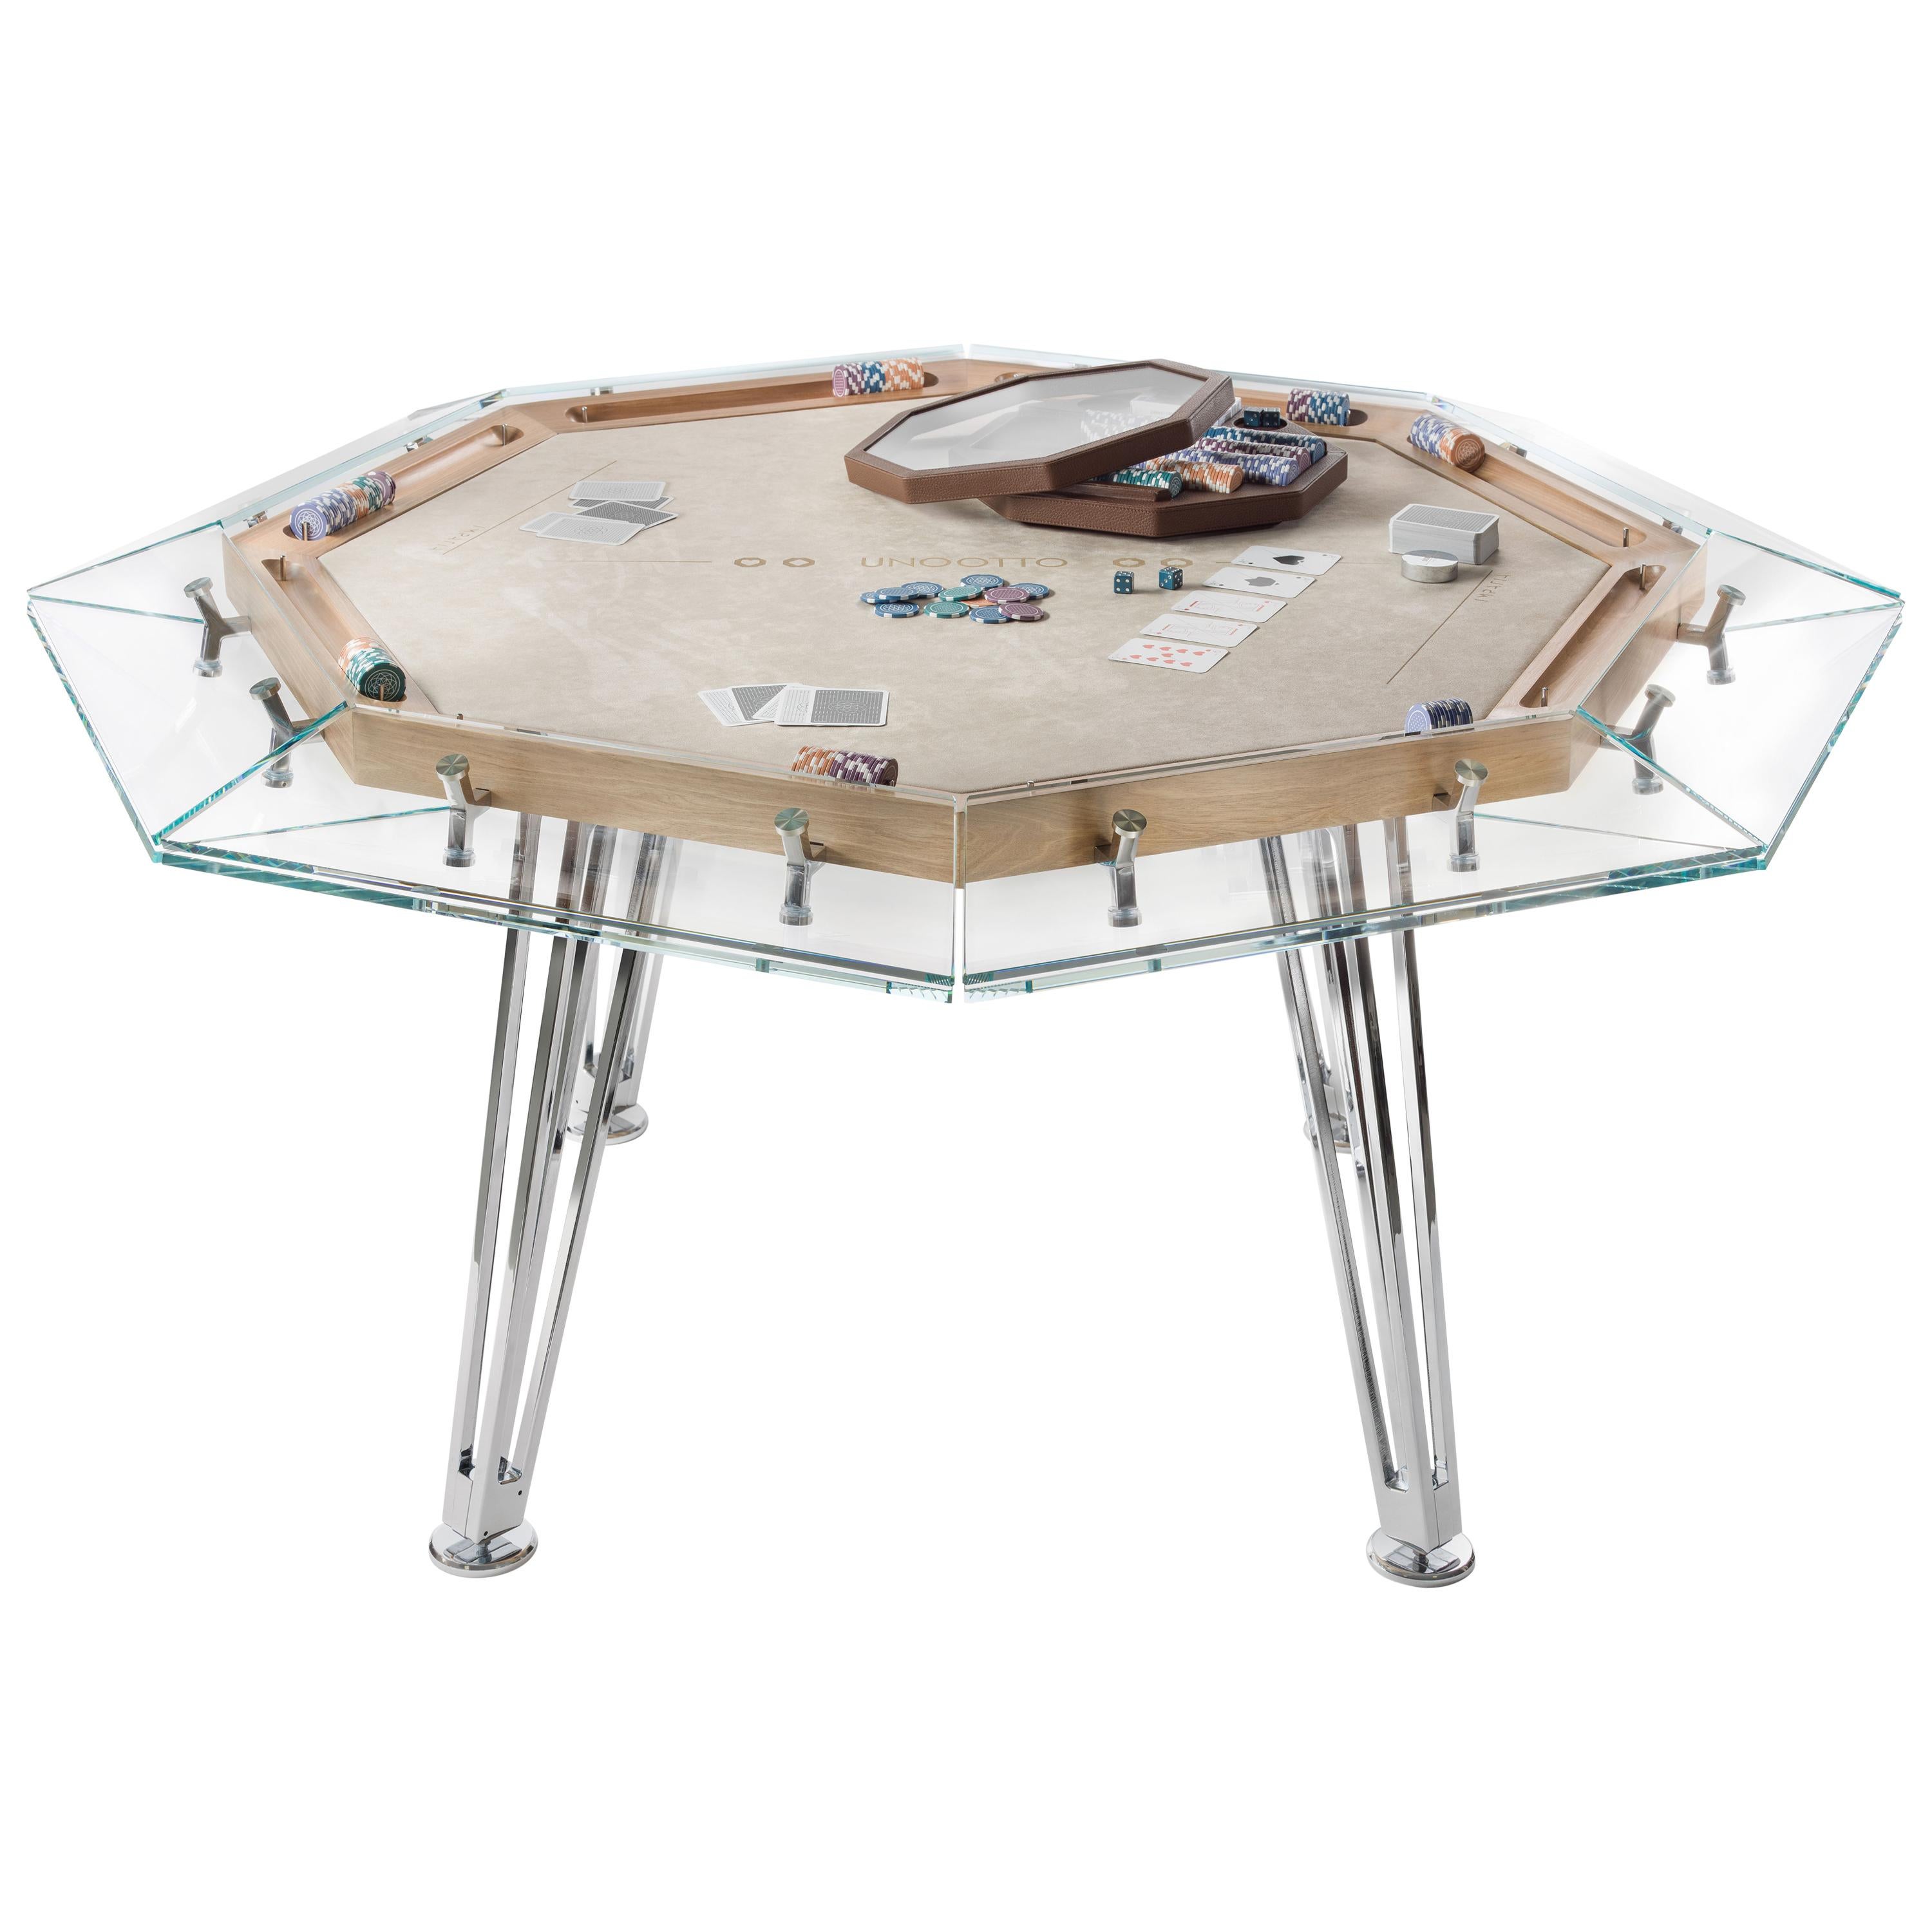 Contemporary Glass and Wood 8 Players Poker Table by Impatia